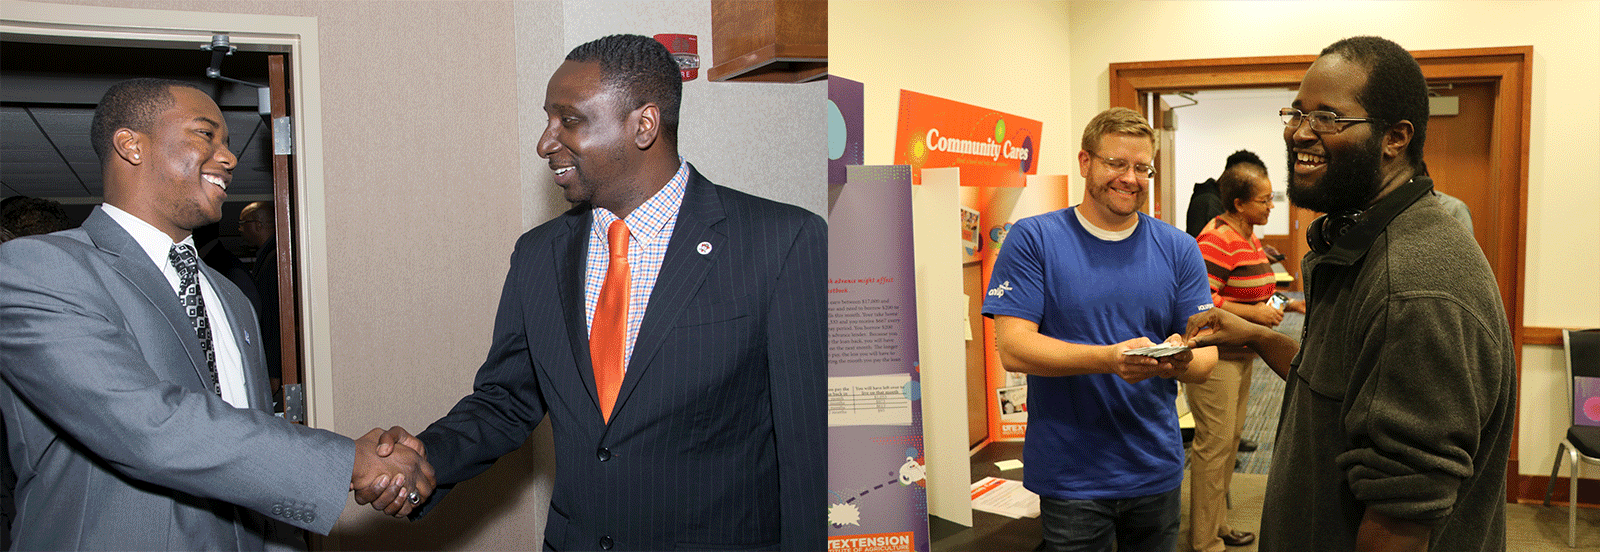 (Left) HAAMI student shakes hand with African American male. (Right) HAAMI student and SunTrust representative laugh in a HAAMI financial session.